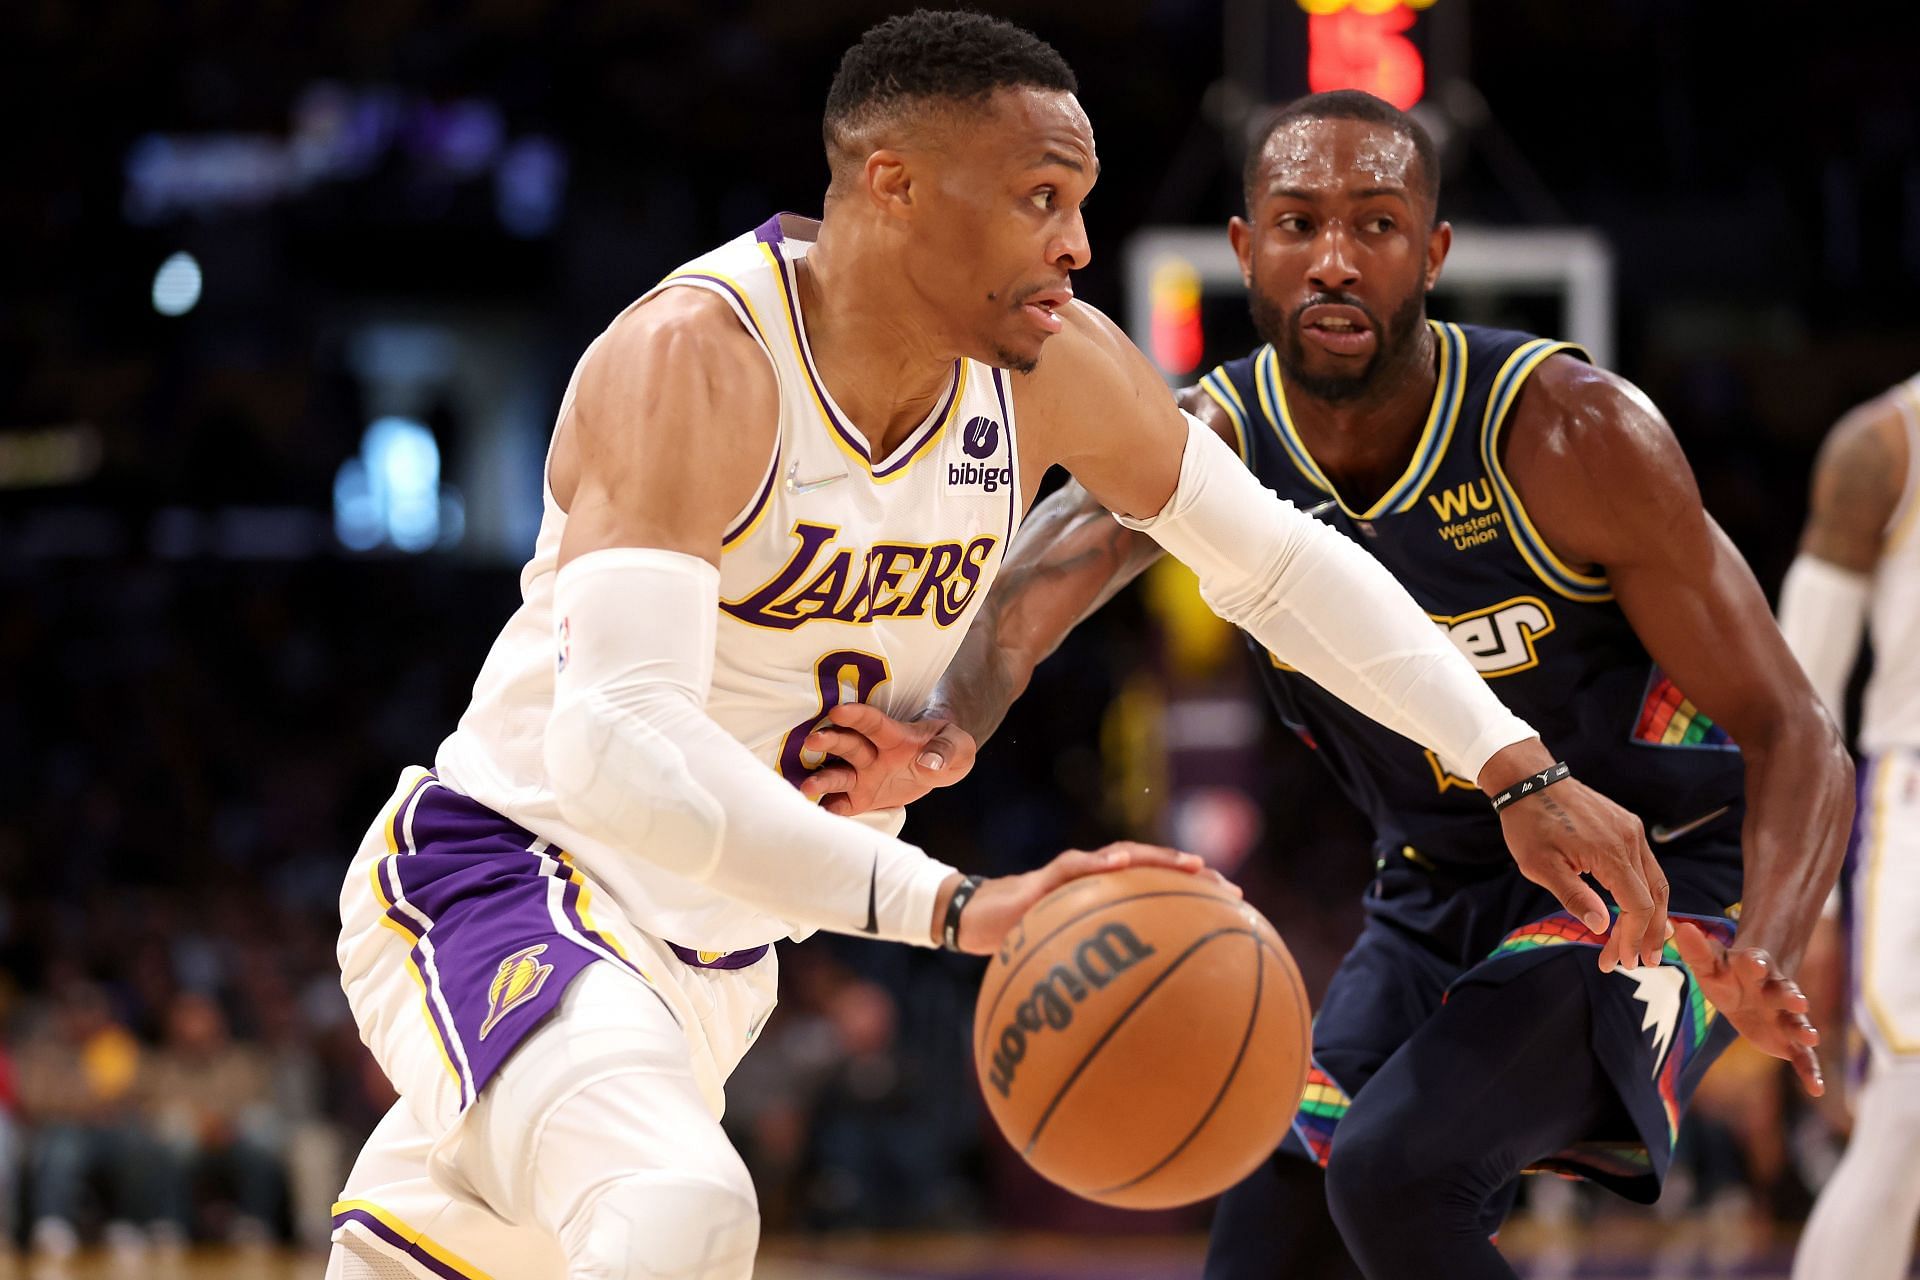 Russell Westbrook #0 of the Los Angeles Lakers dribbles past the defense of Davon Reed #9 of the Denver Nuggets during the second half of a game at Crypto.com Arena on April 03, 2022, in Los Angeles, California.